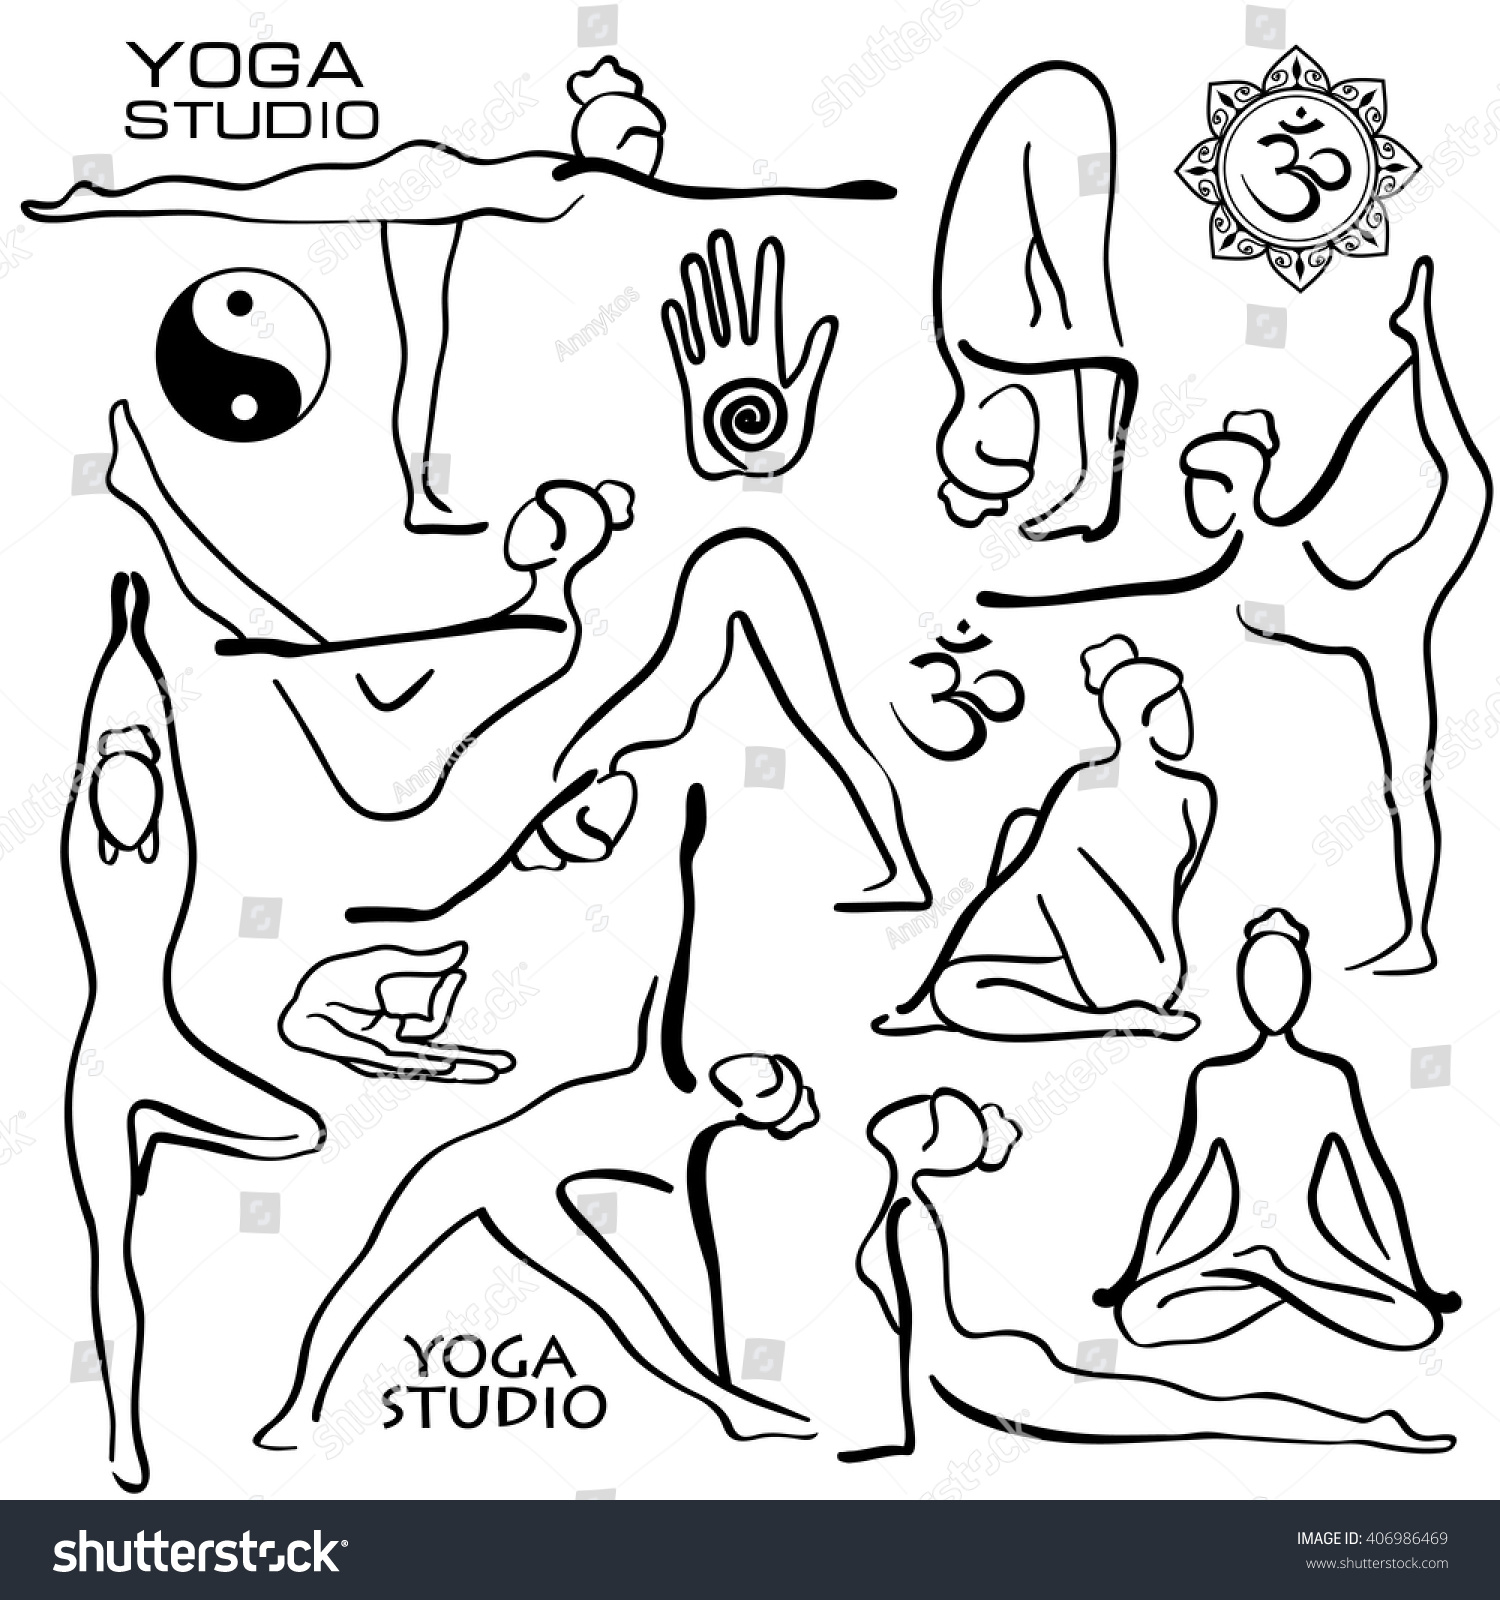 Set Of Isolated Black Hand Drawn Outline Yoga Poses. Collection Of ...